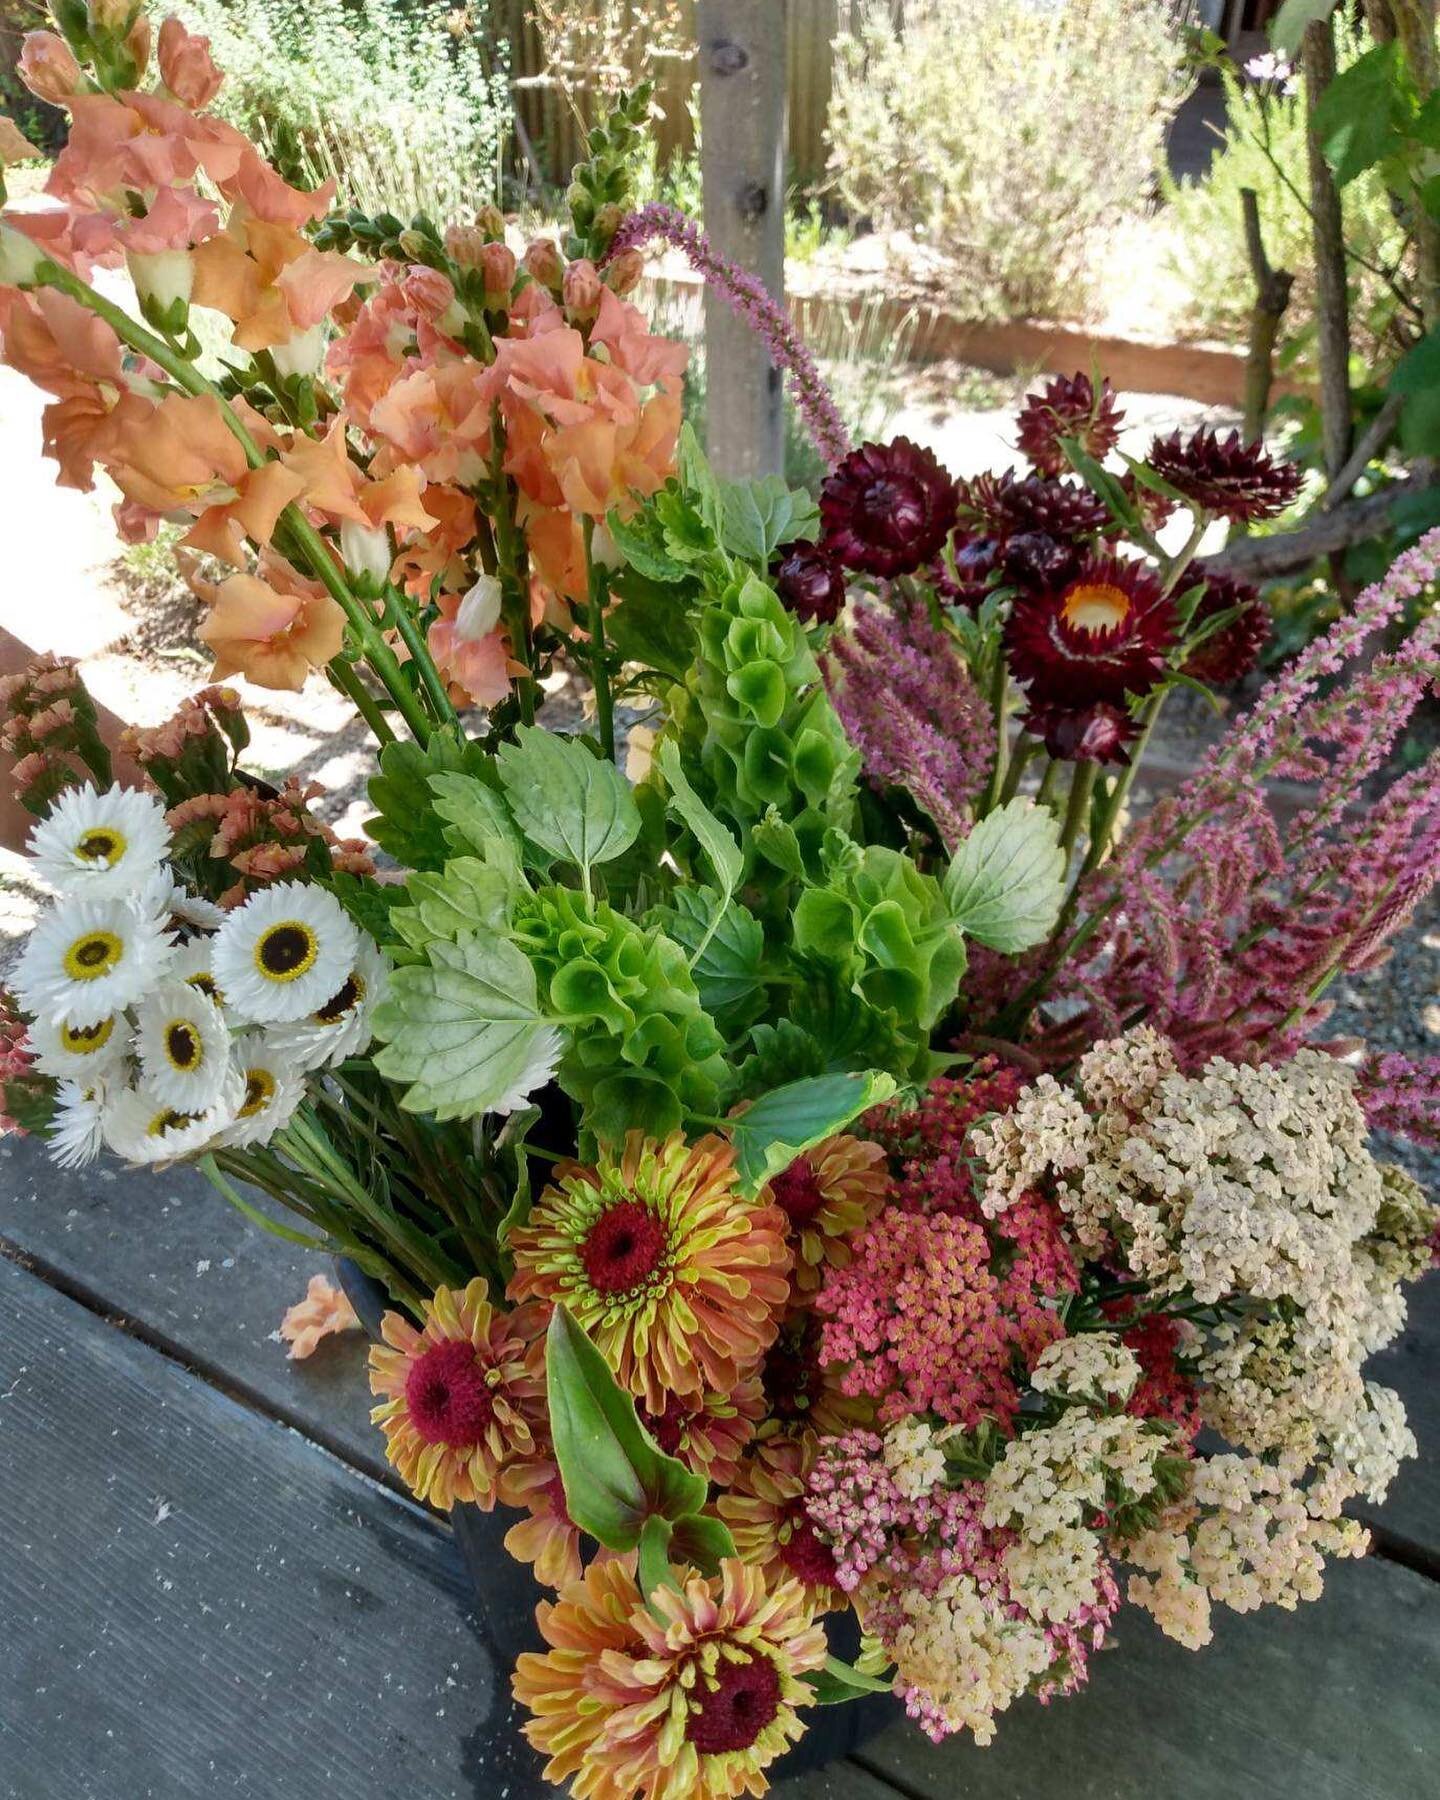 We had so much fun at our flower walk that we are doing it again! Come play in the flower rows with us. Harvest your own bucket of flowers, make  bouquets  and enjoy a relaxing time on our farm with the flower crew! 

Saturday, August 27th
4-6:30 pm
